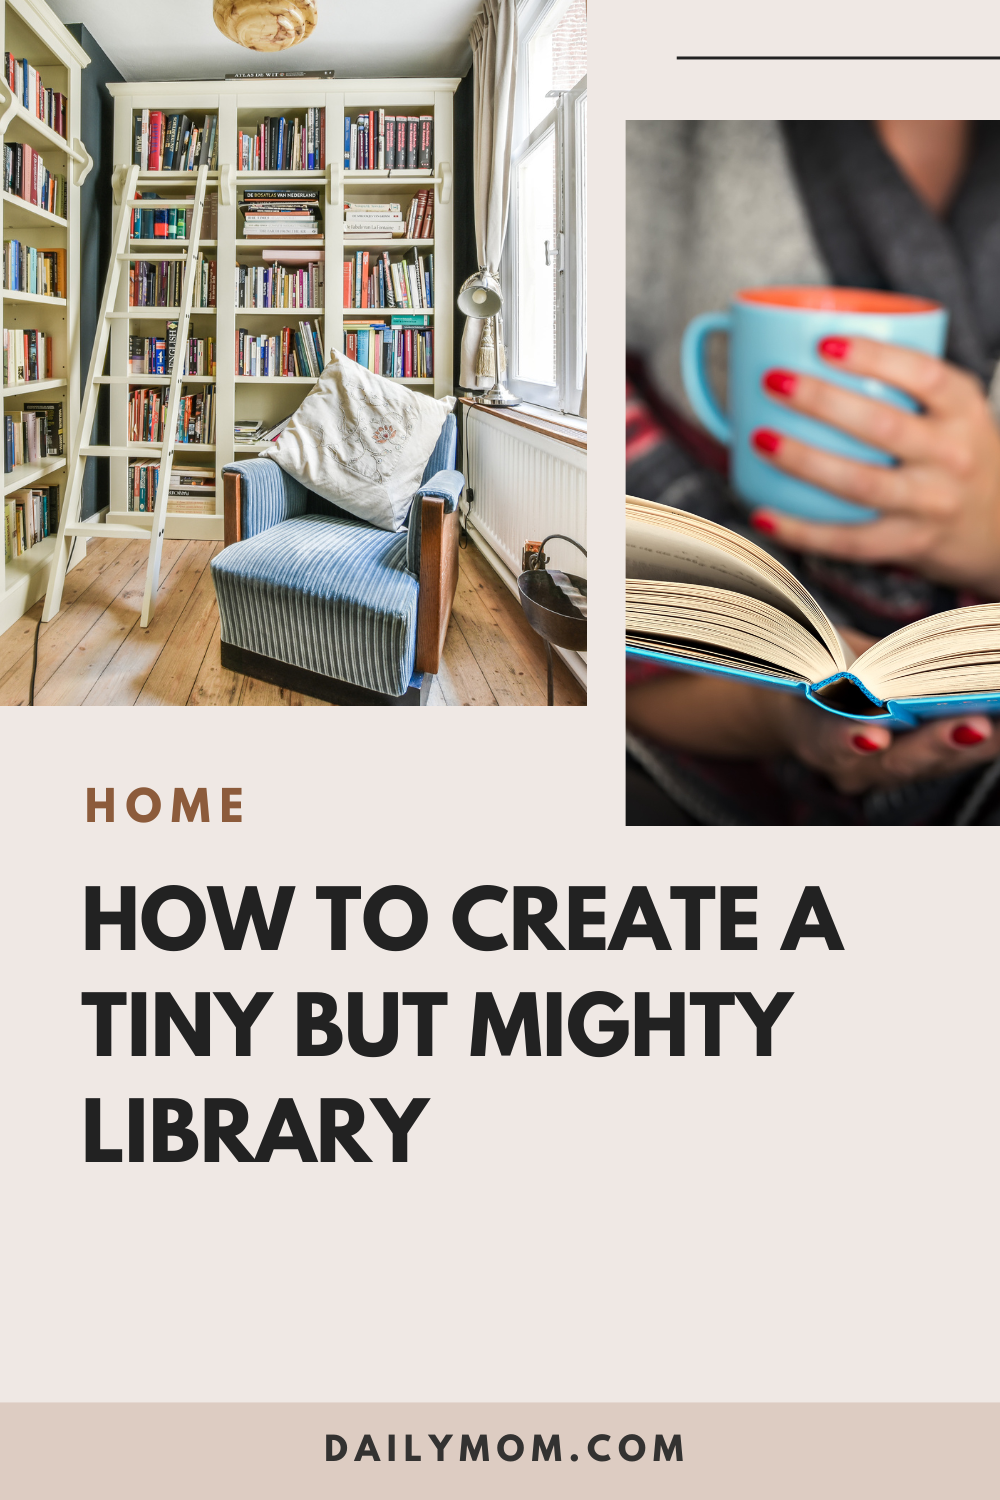 How To Create A Tiny Library Room In Any Home